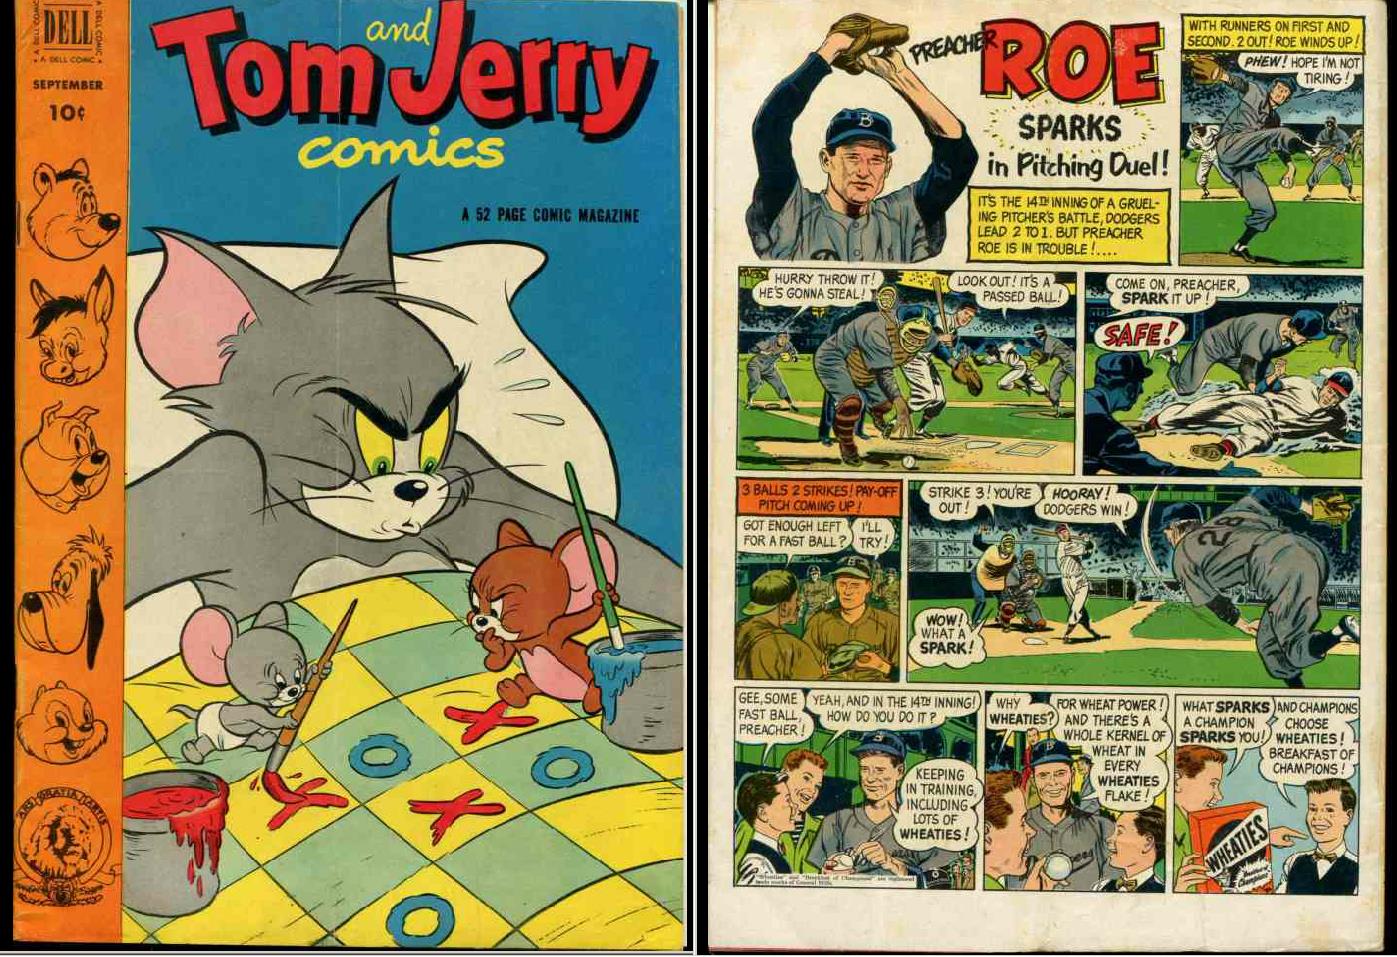  Comic: DELL 1952 - PREACHER ROE AD back TOM & JERRY #98 (10 cents) Baseball cards value